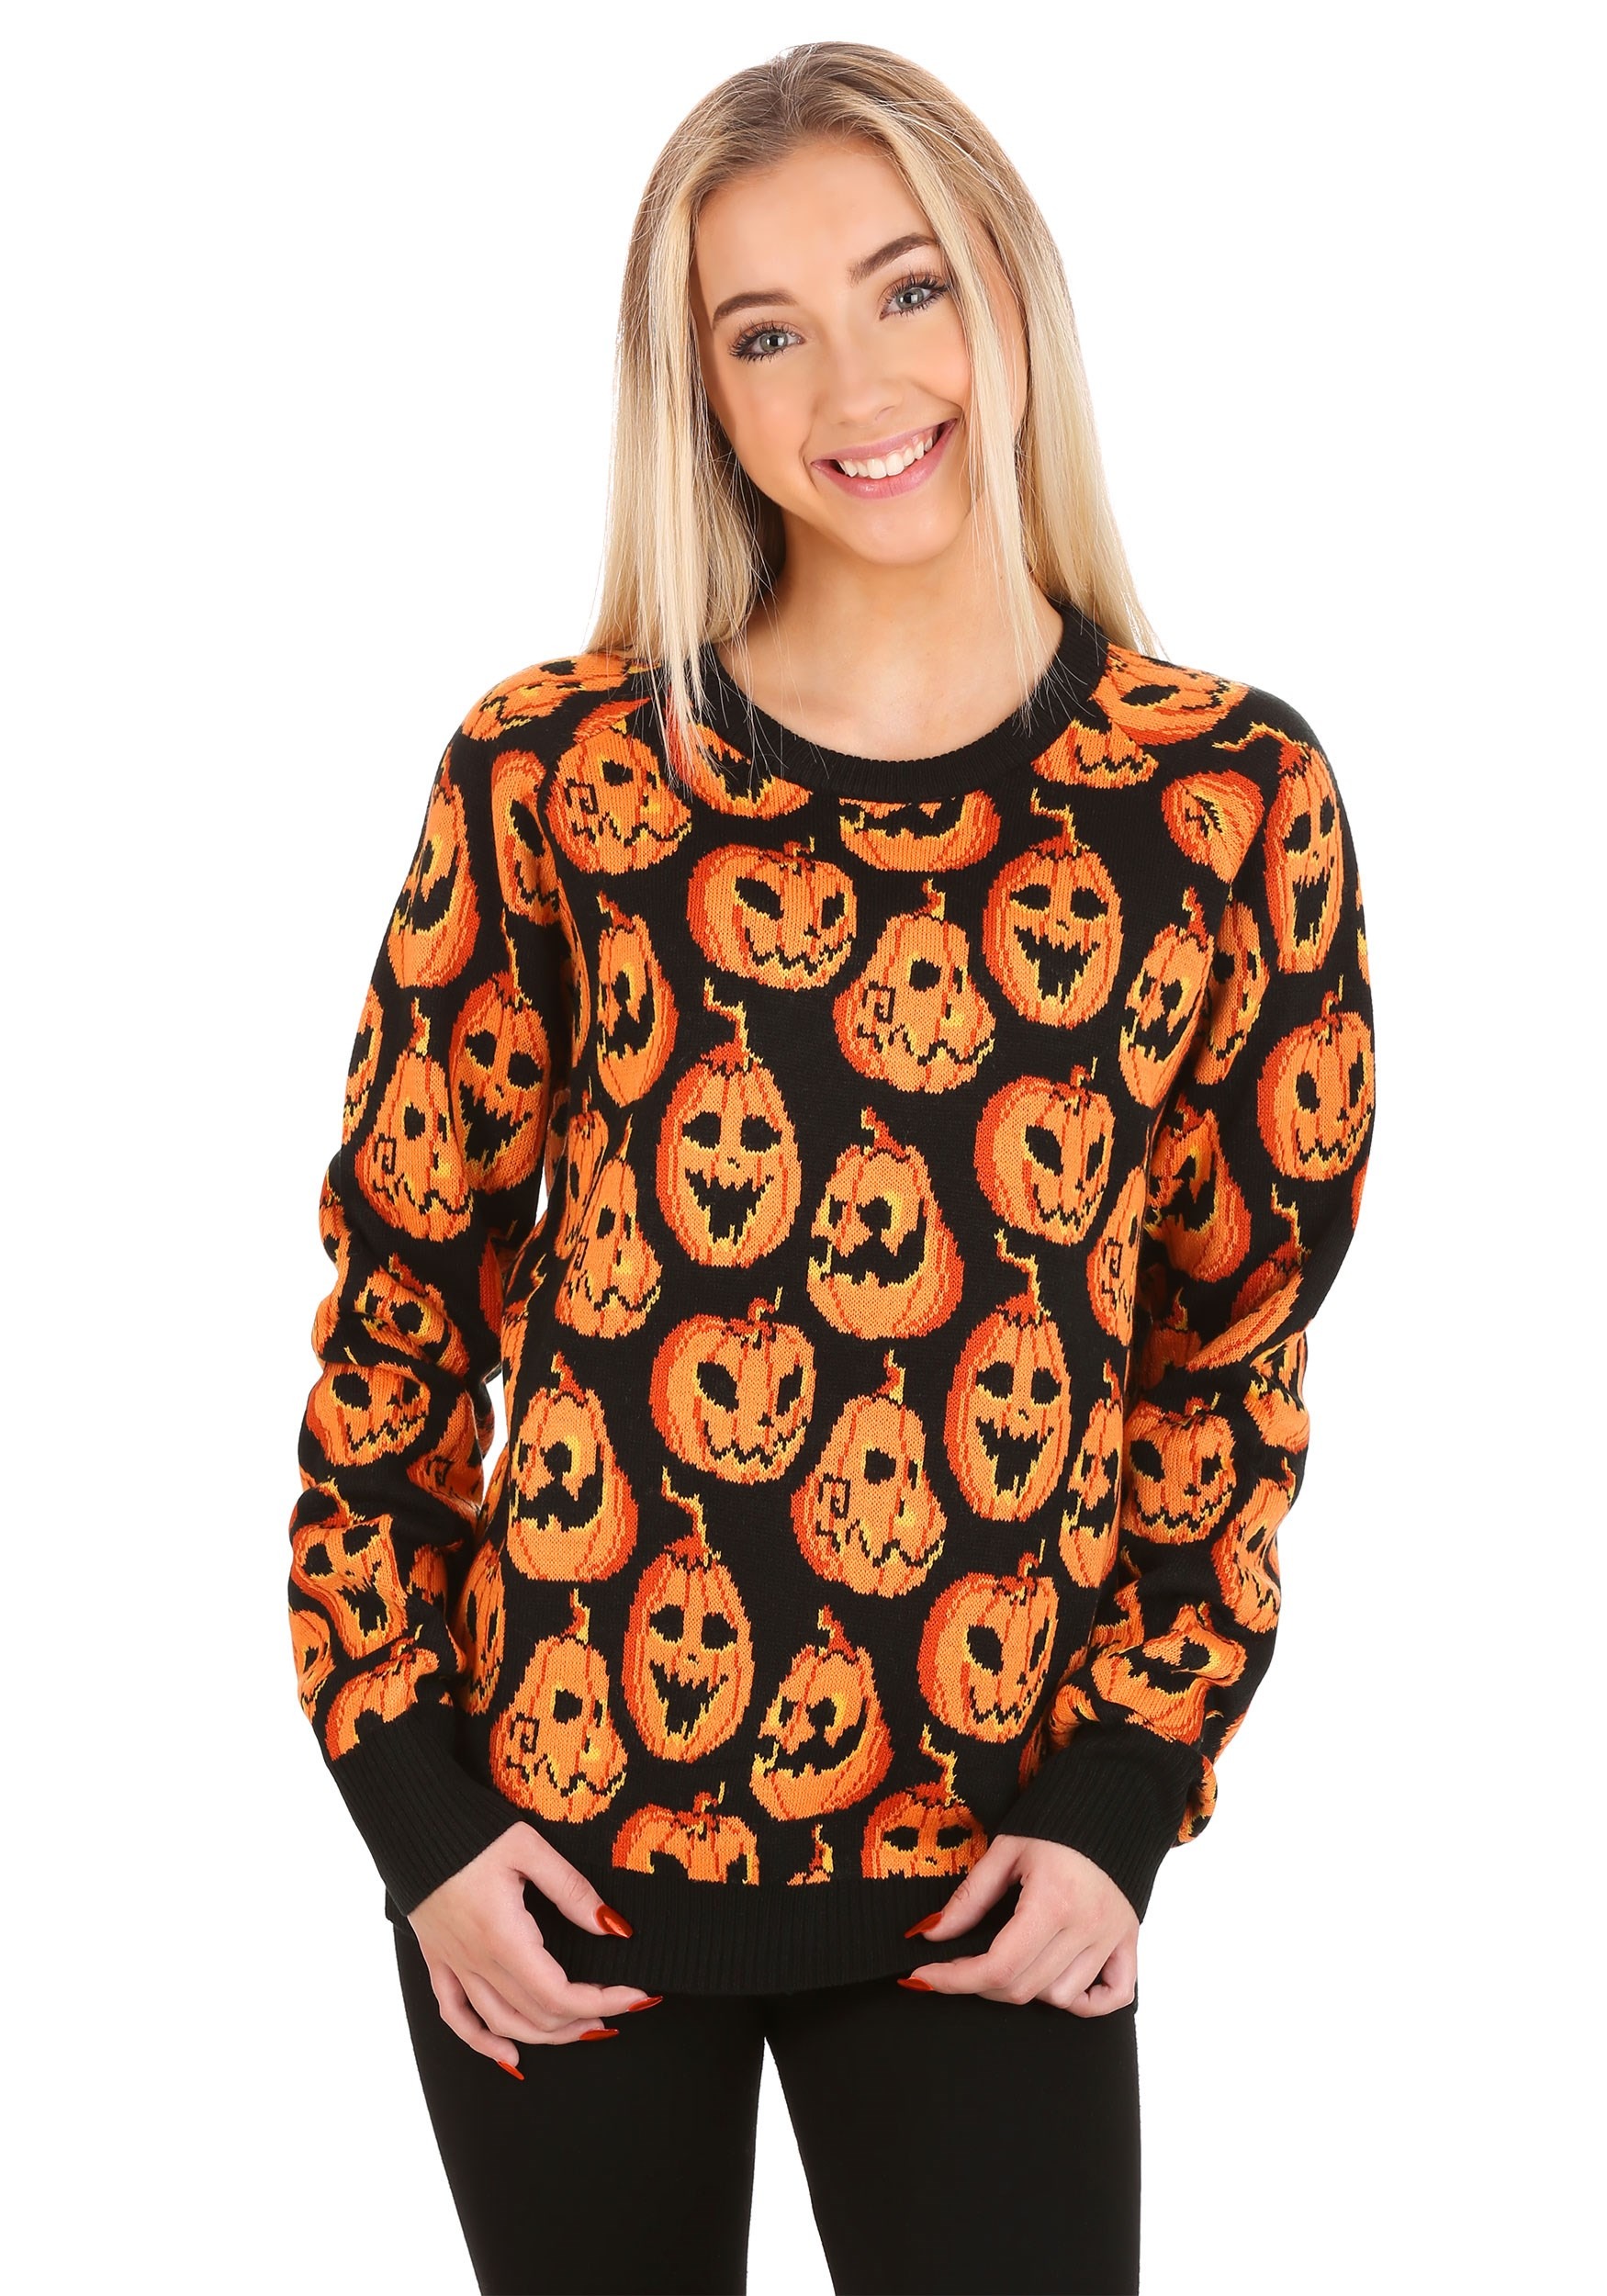 Pumpkin Frenzy Ugly Halloween Sweater for Adults